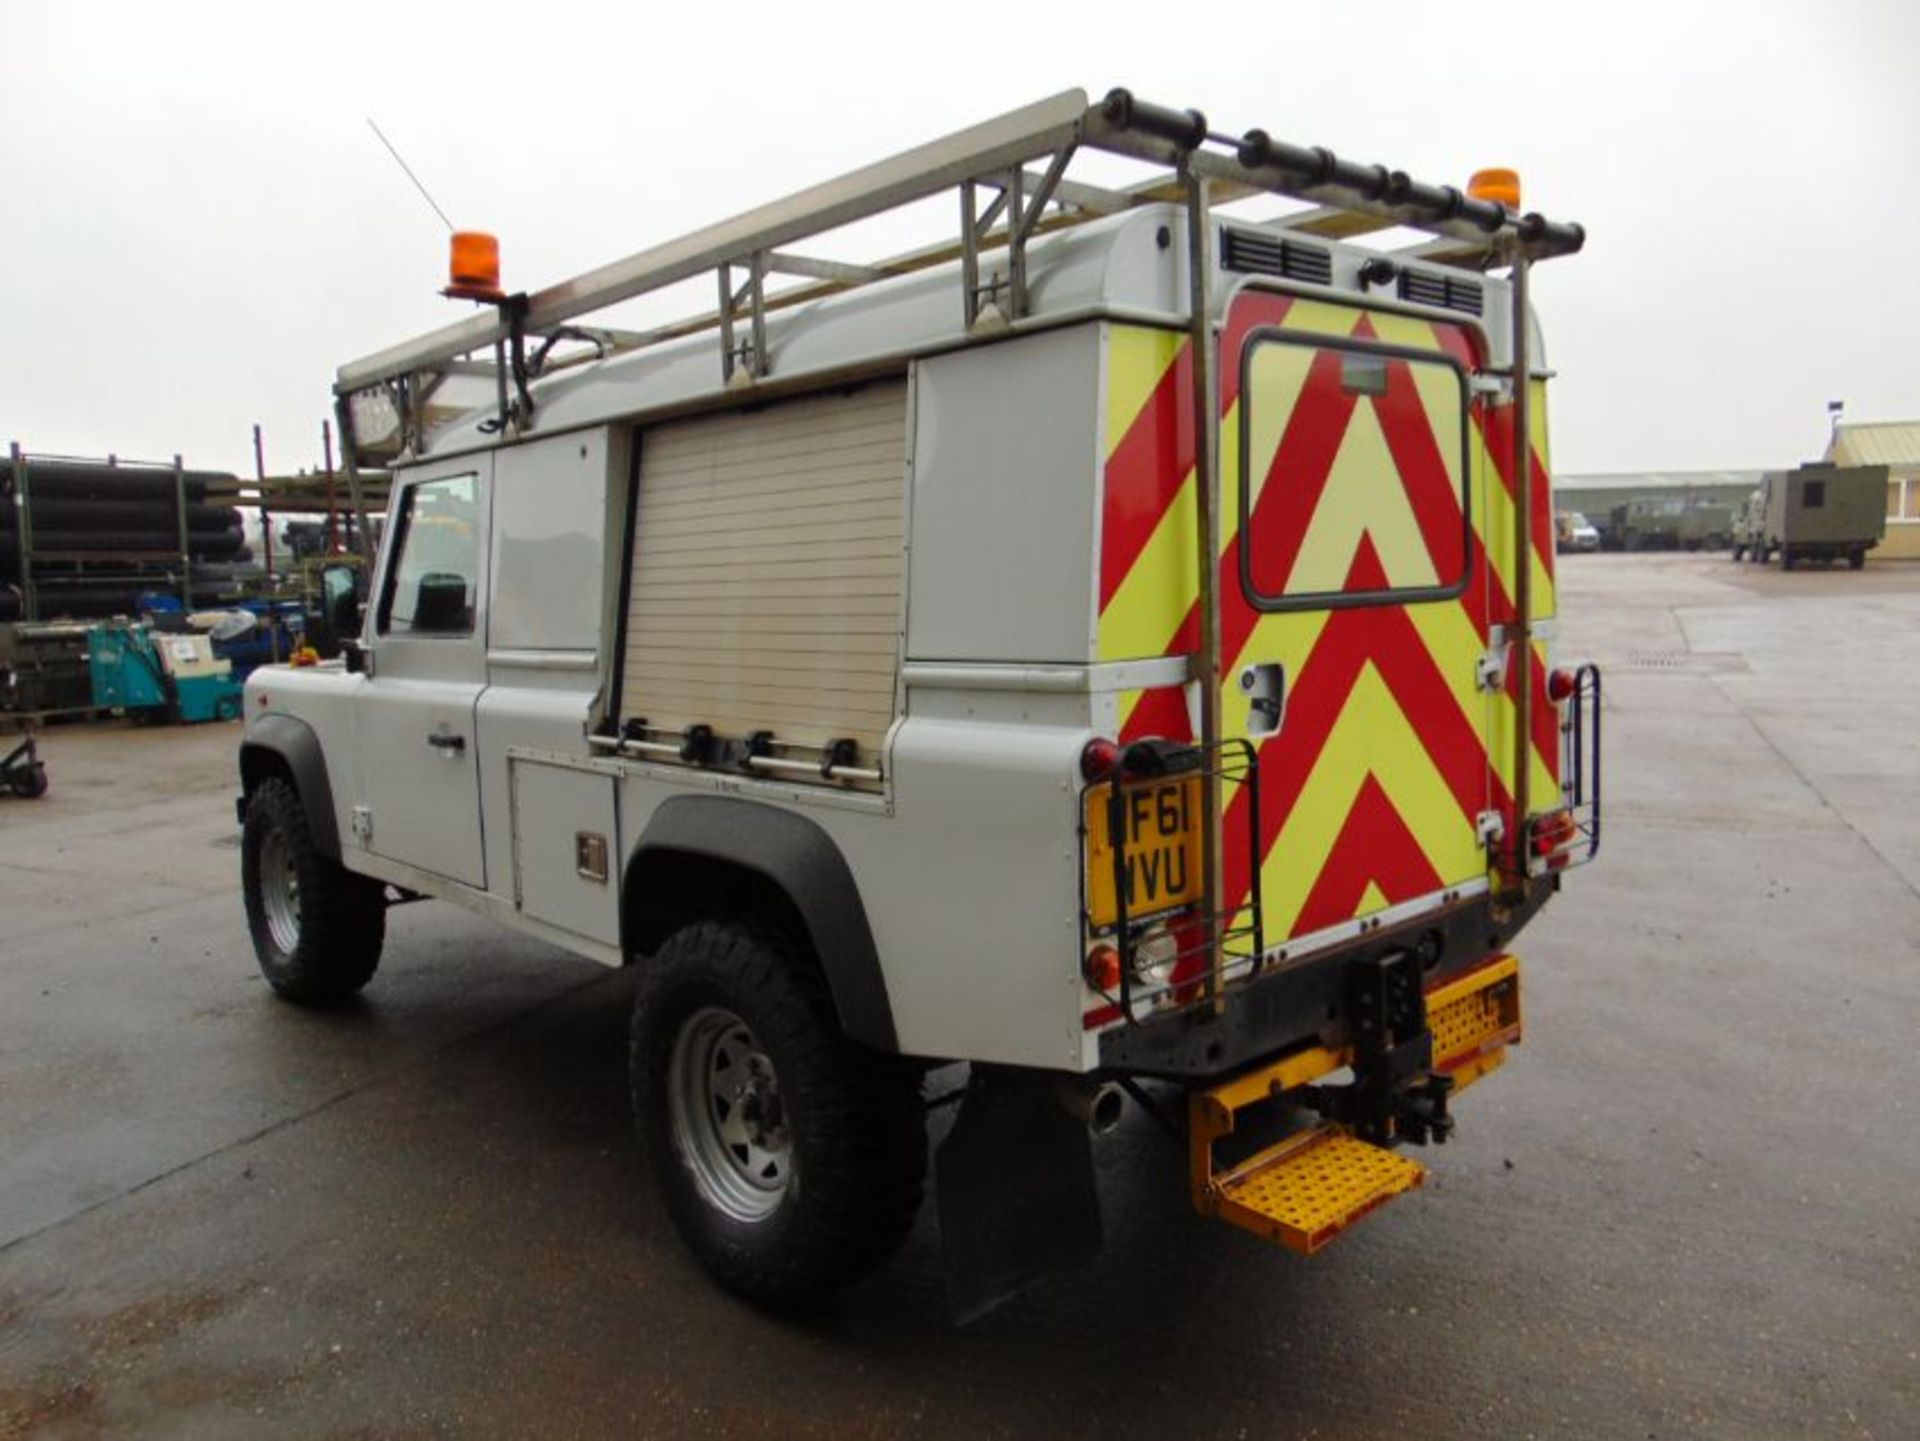 2011 Land Rover Defender 110 Puma hardtop 4x4 mobile workshop with Winch Etc. From UK Utility Co. - Image 8 of 31